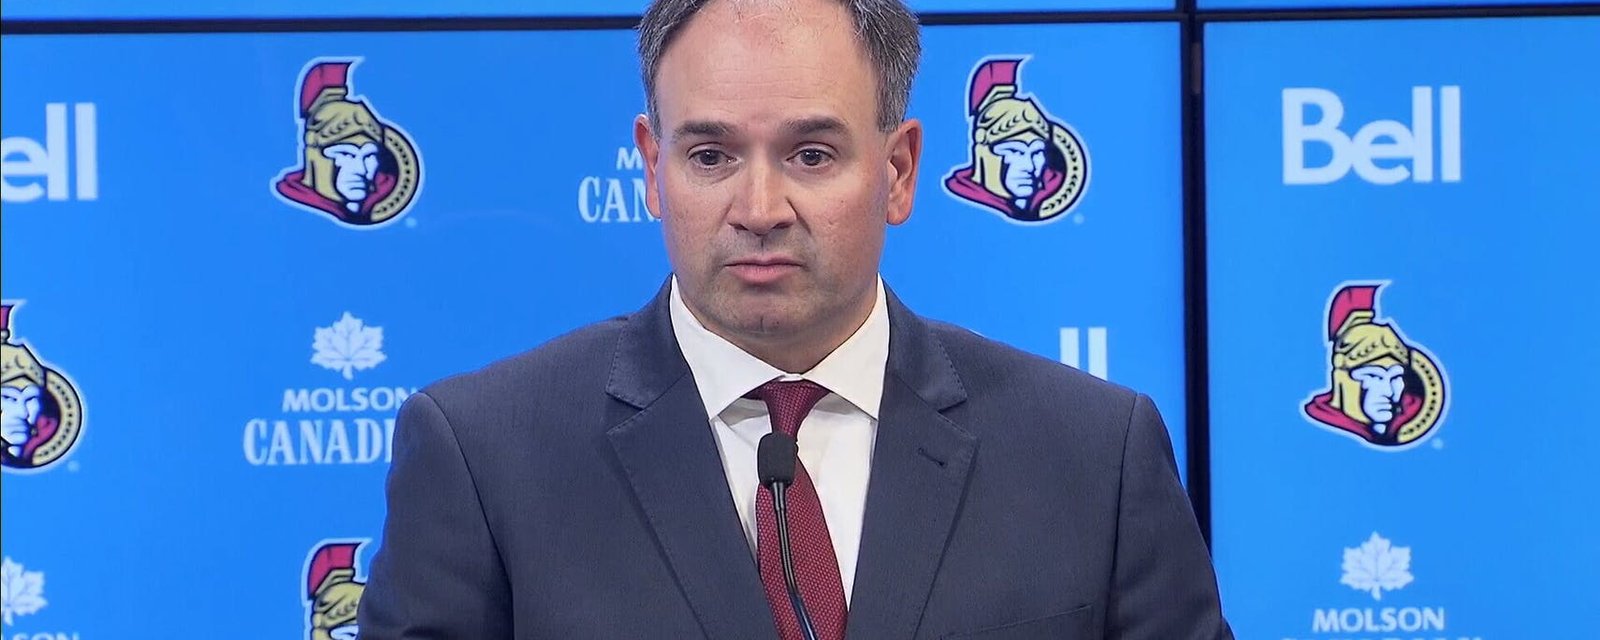 Sens GM Dorion has the balls to share this message to his players! 